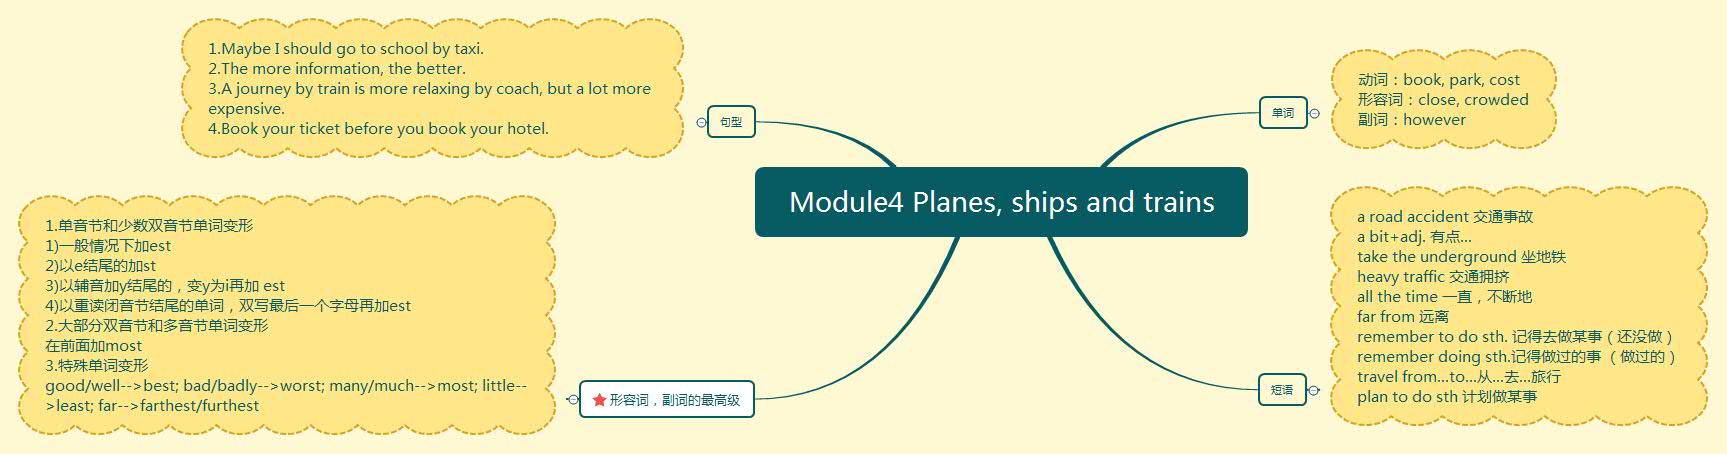 Module4 Planes, ships and trains.jpg